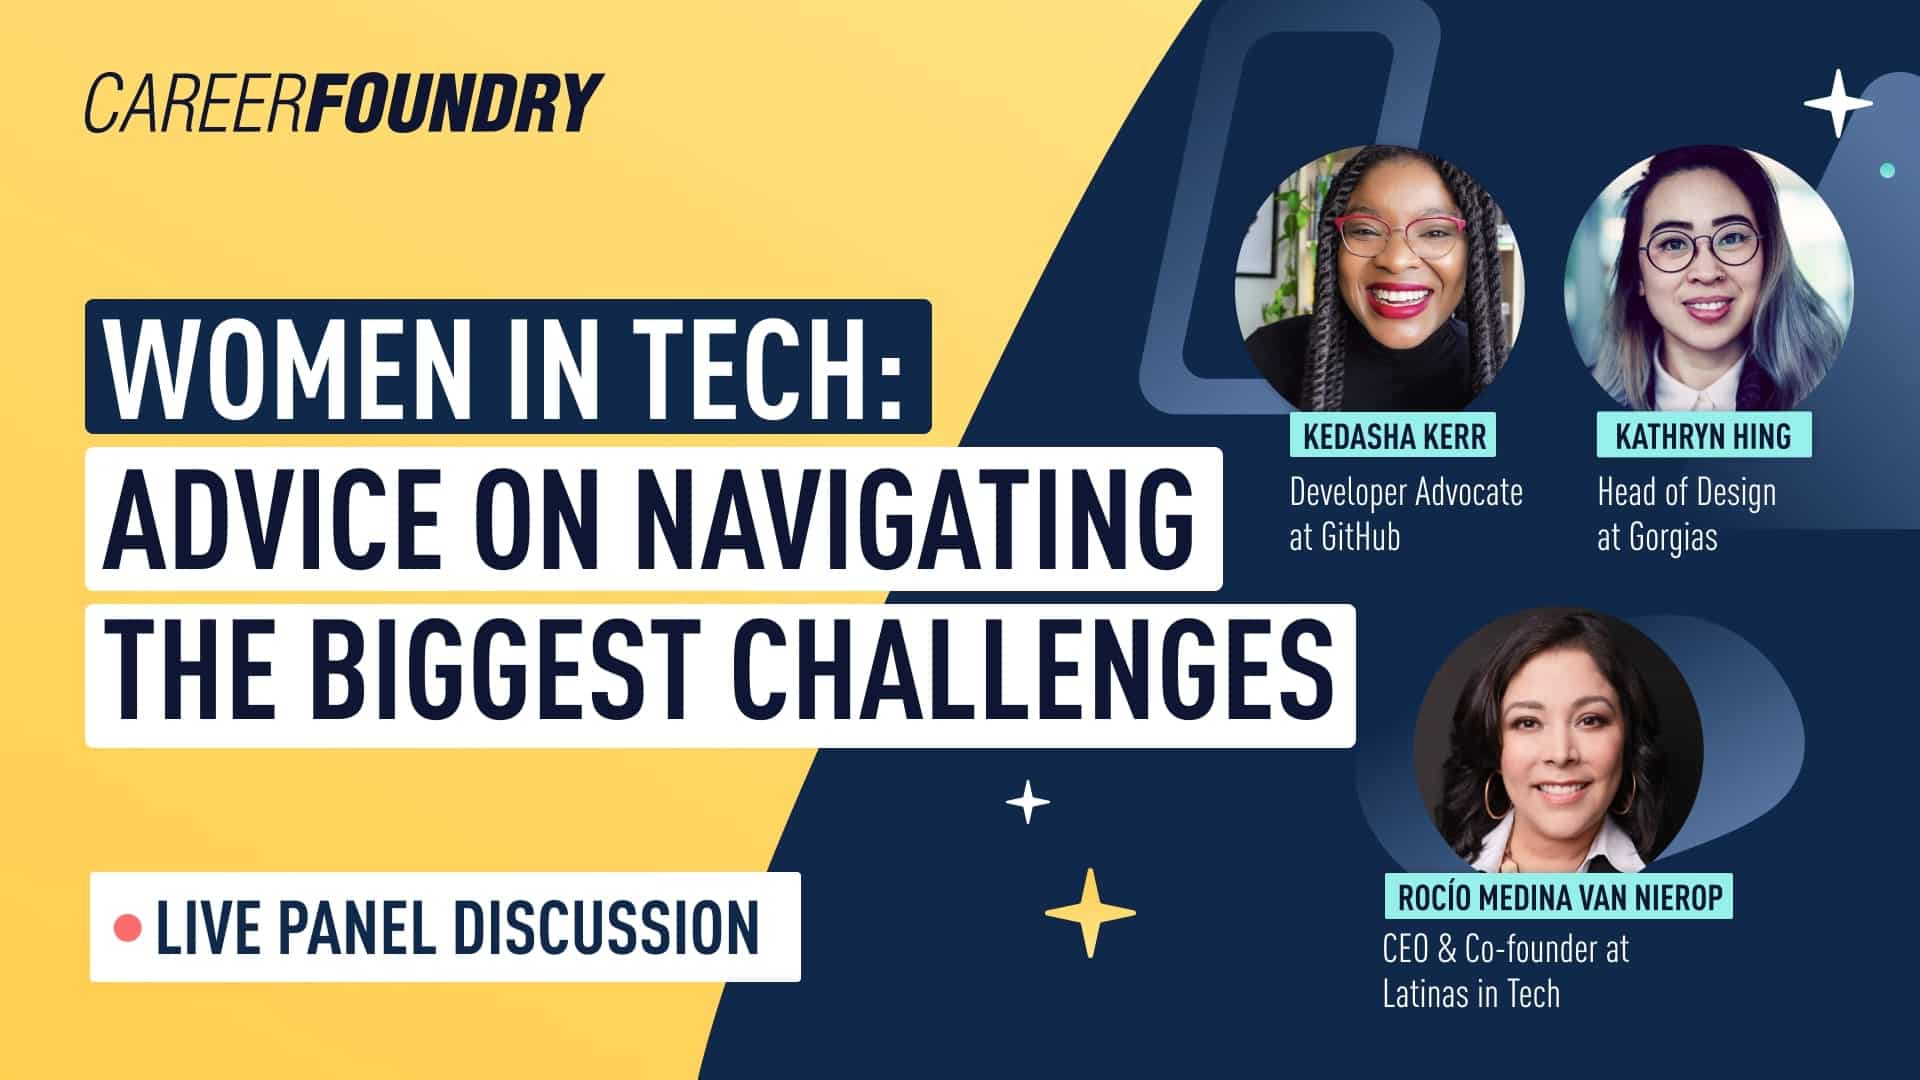 Women in Tech: Advice on Navigating the Biggest Challenges